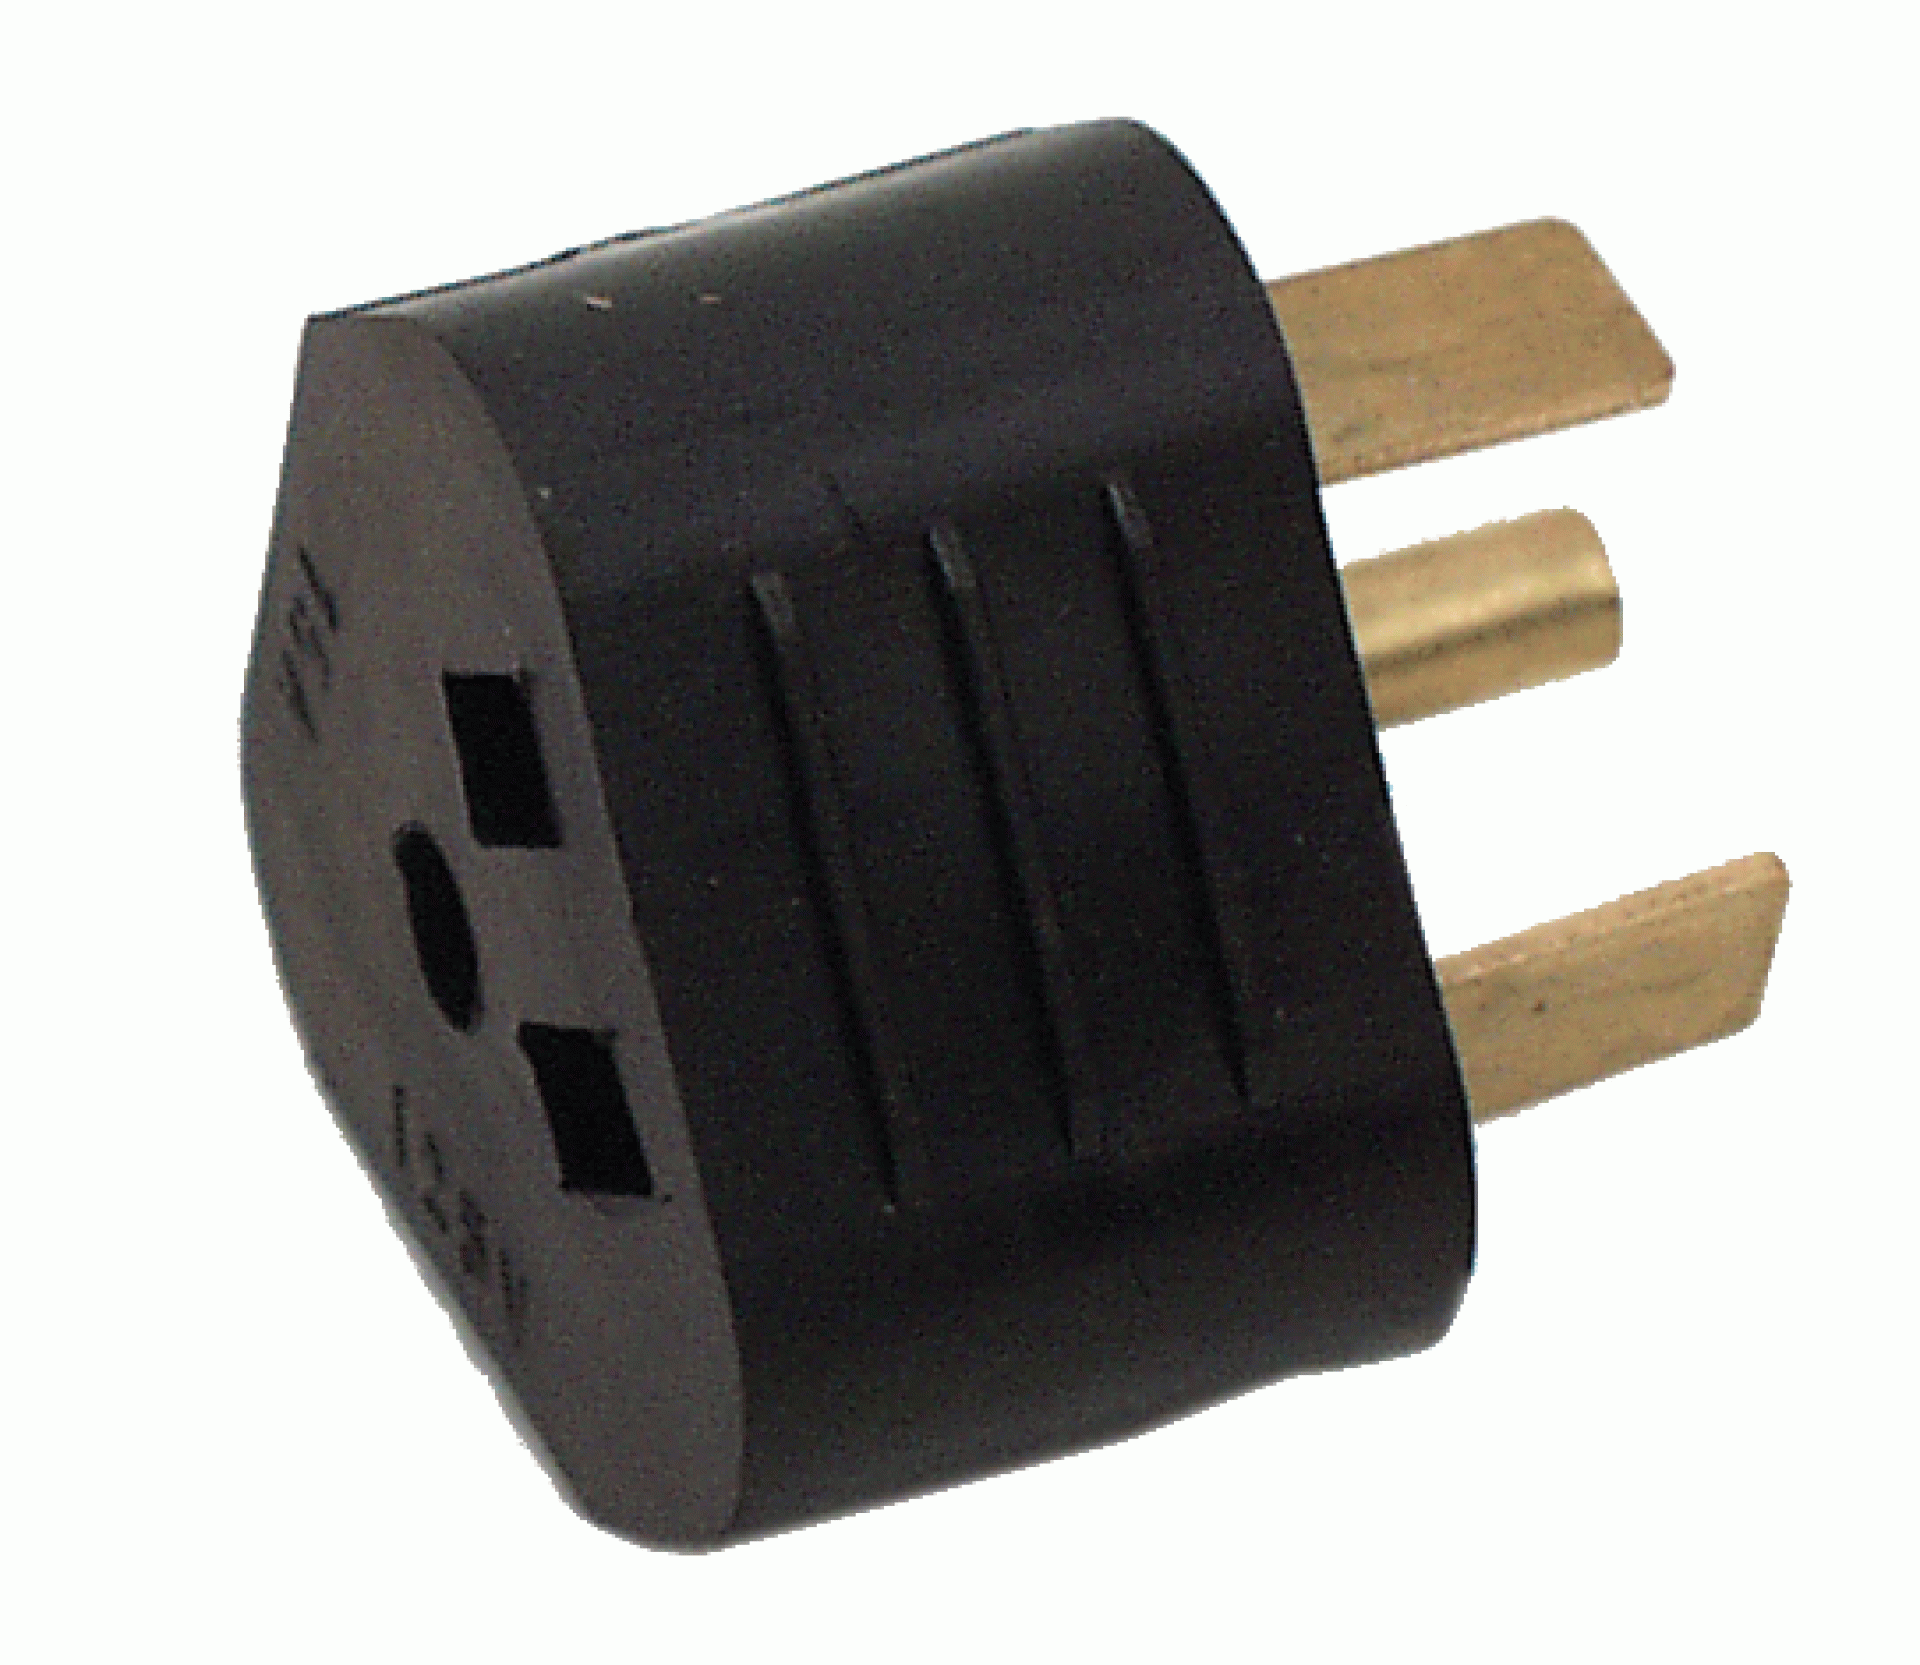 VALTERRA PRODUCTS INC. | A10-0012 | ELECTRICAL ADAPTER 15/30 AMP